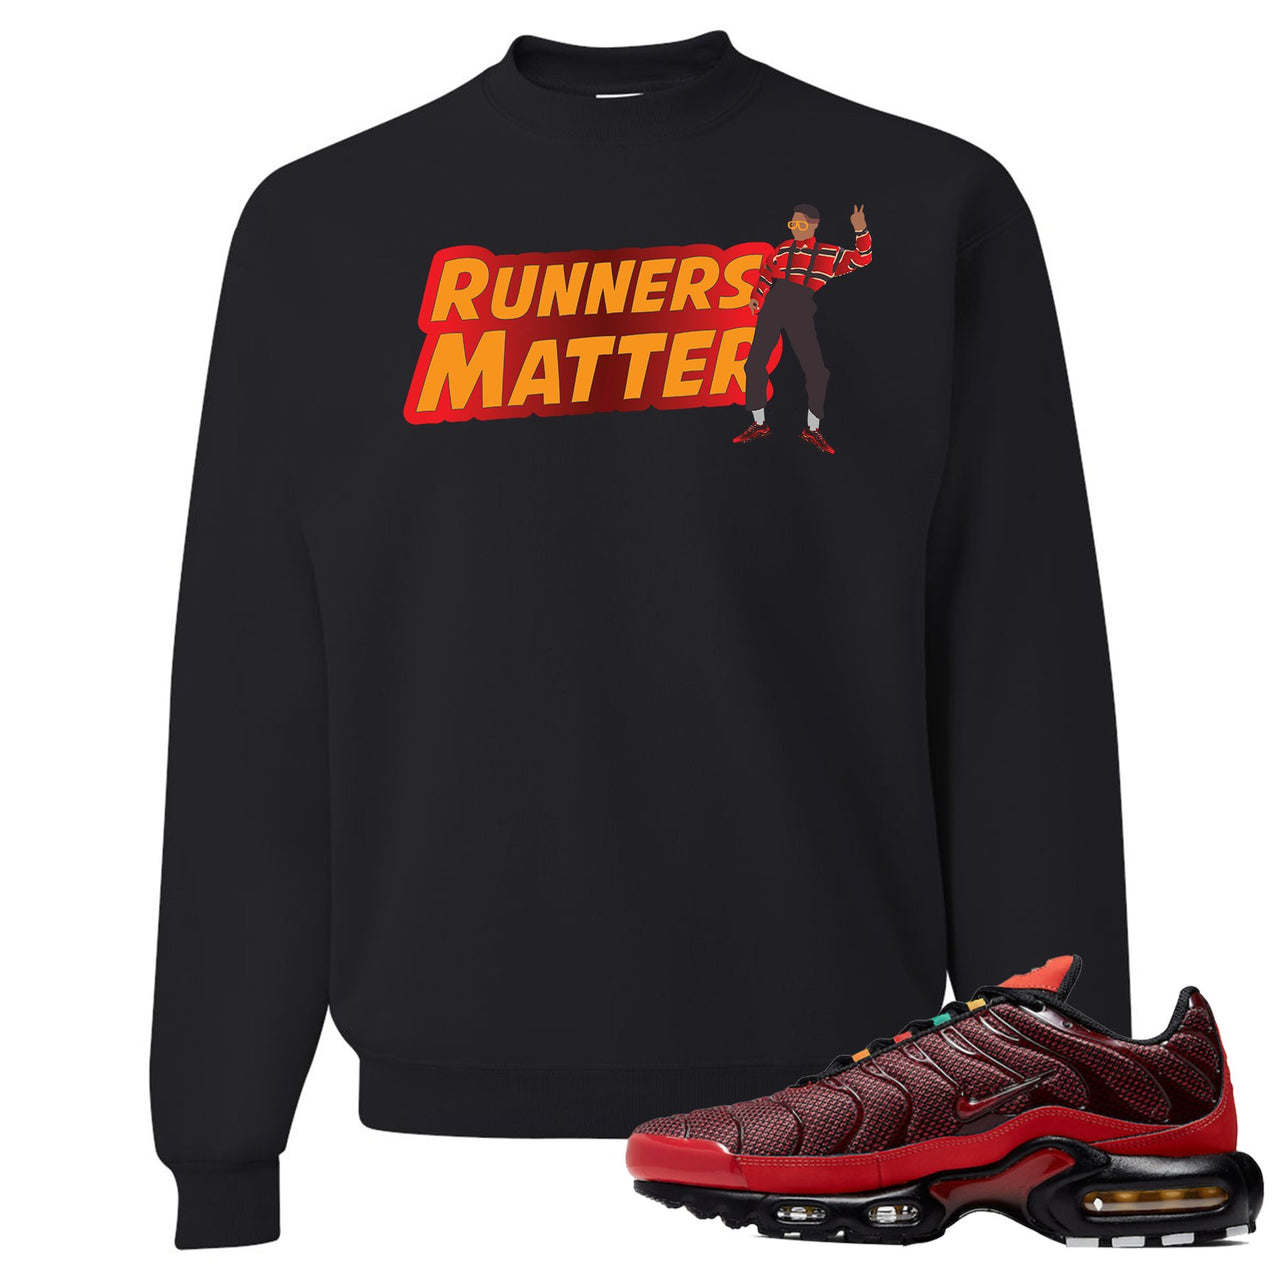 Printed on the front of the air max plus sunburst sneaker matching black crewneck sweatshirt is the runners matter logo